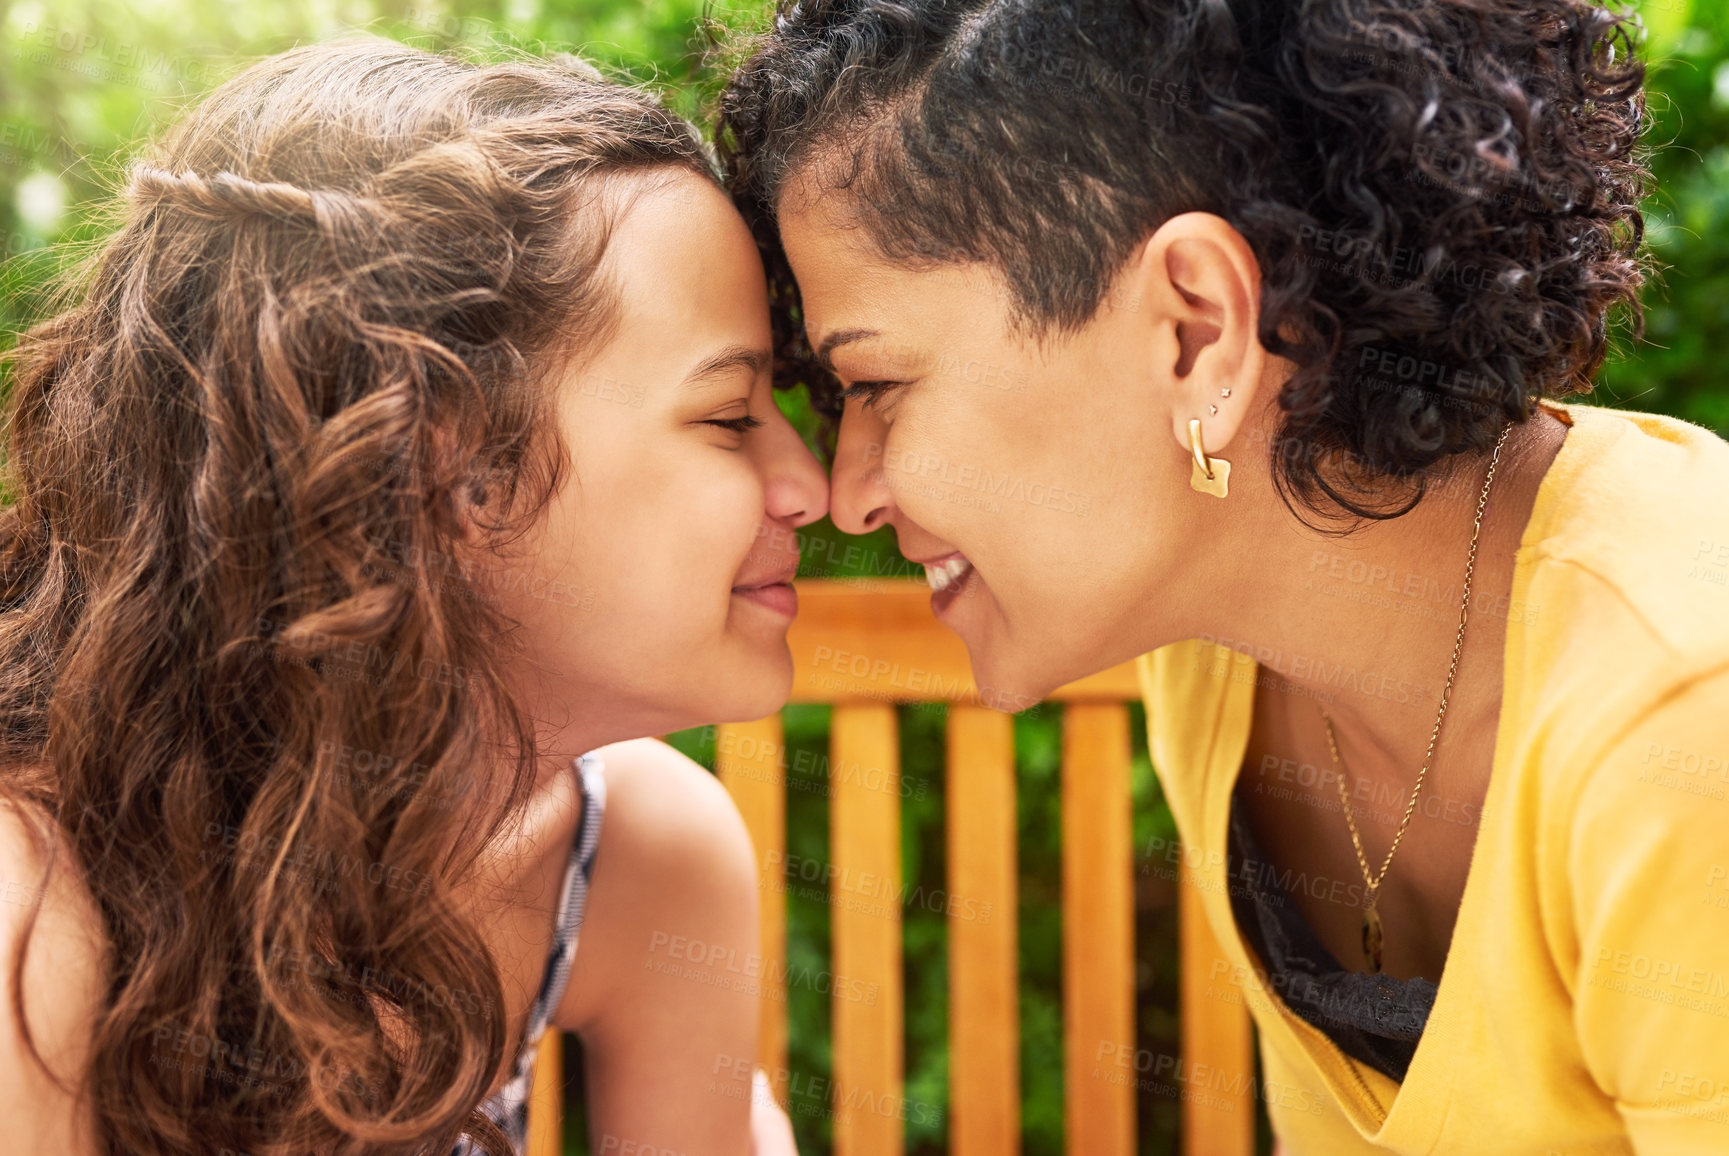 Buy stock photo Cropped shot of a young mother and her daughter sitting face to face outside in the park